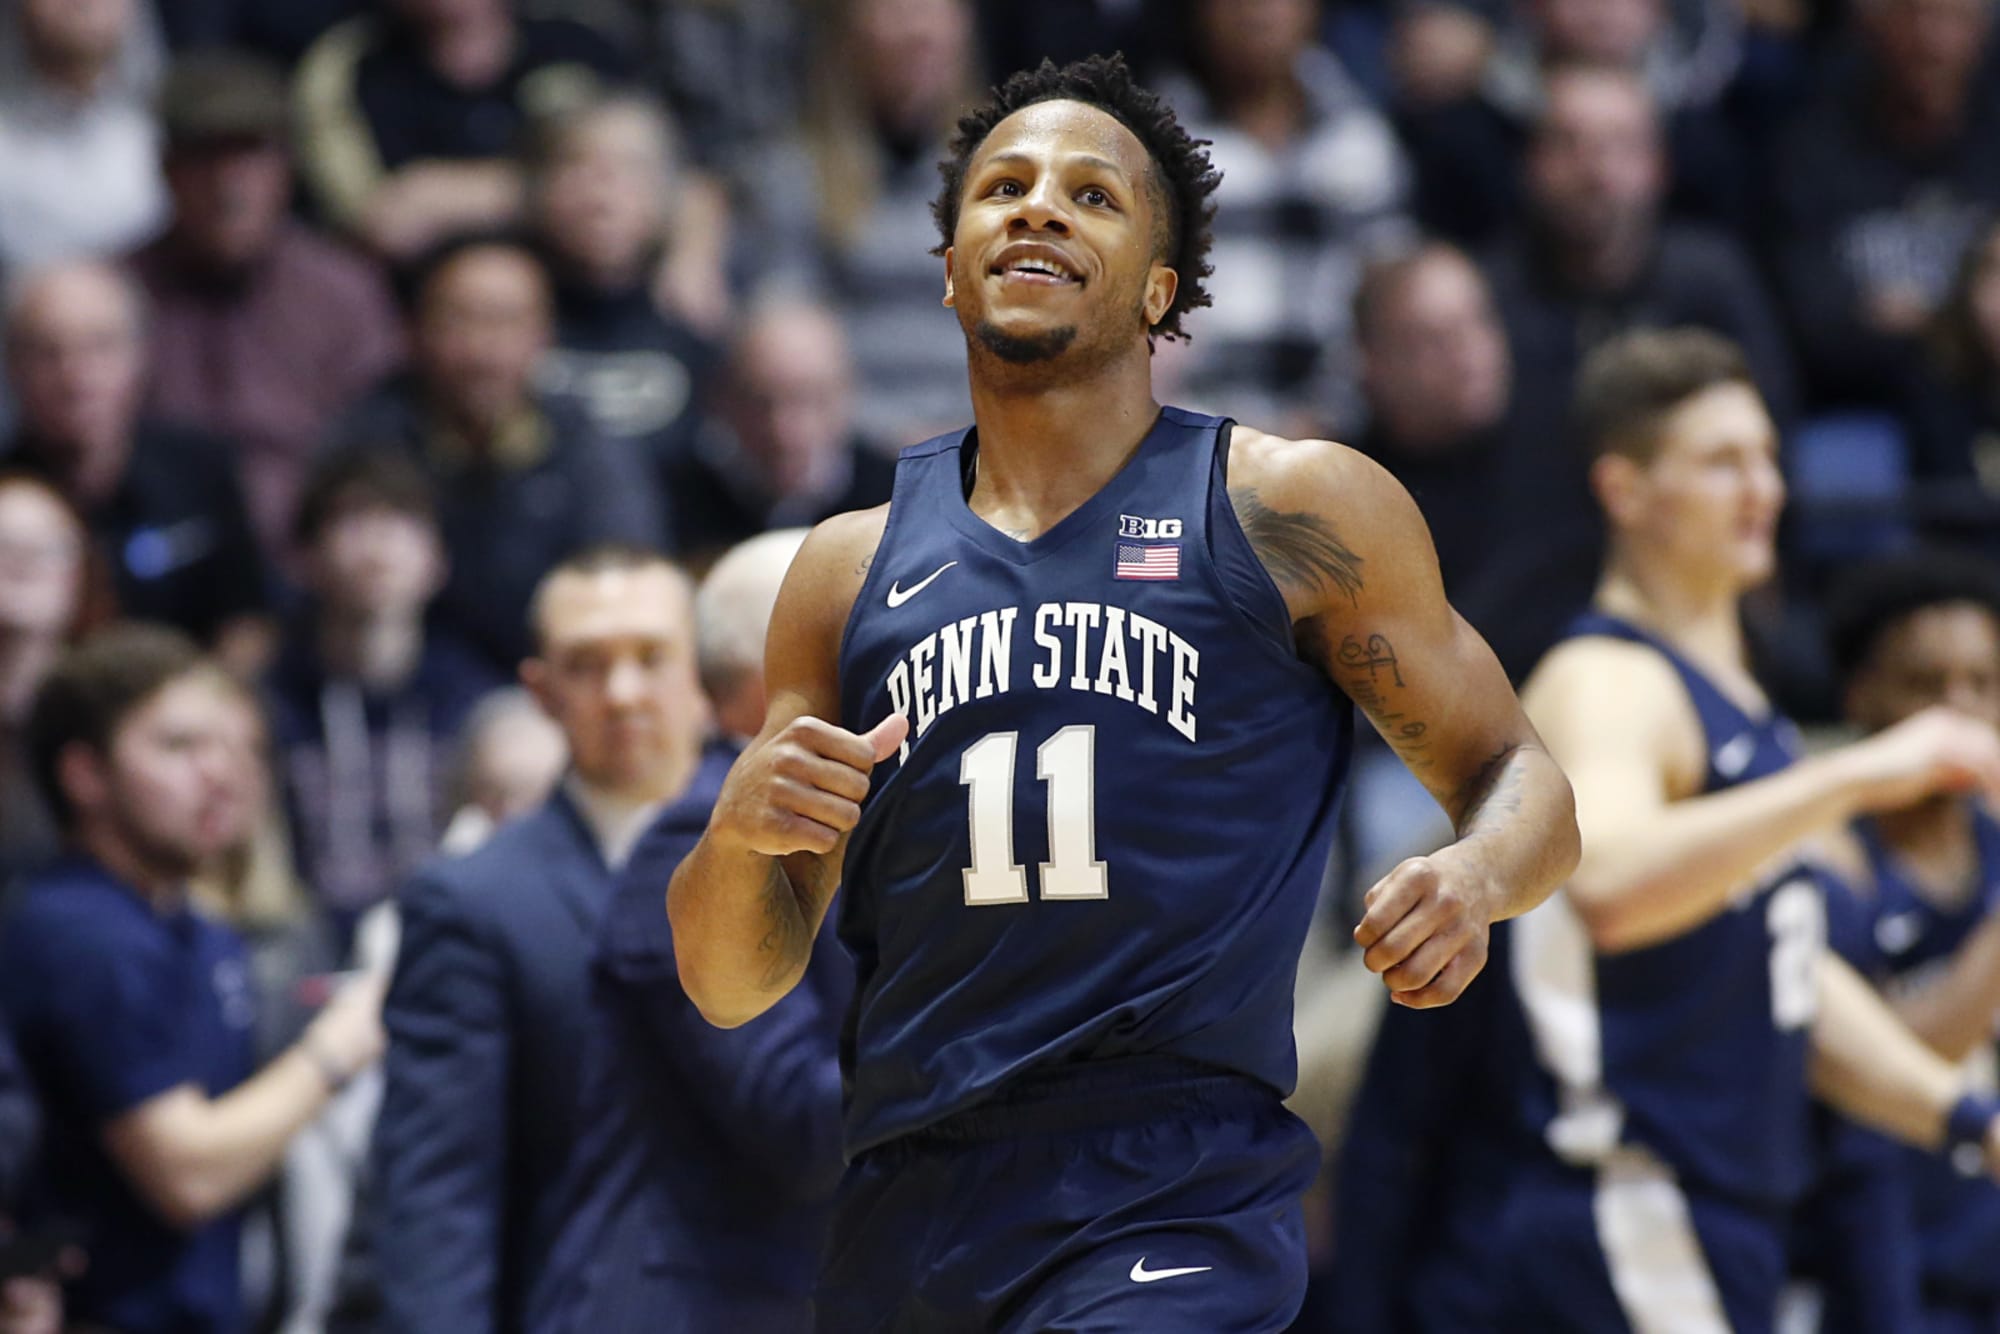 Illinois vs. Penn State 201920 basketball game preview, TV schedule